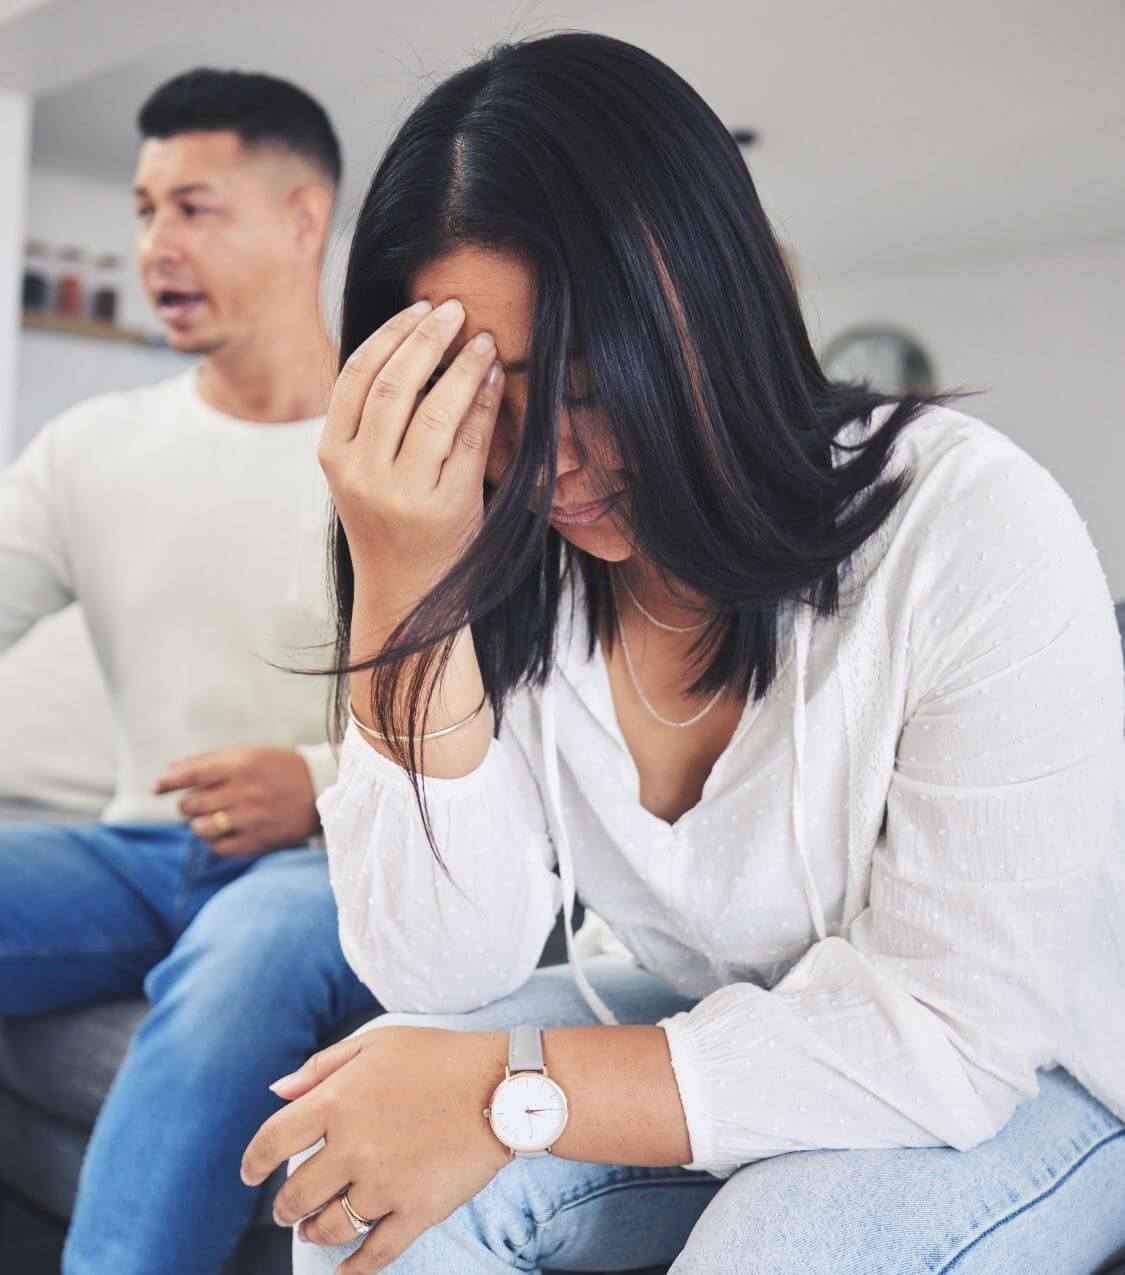 Image of an upset woman sitting on a couch with her partner resting her hand on her forehead. Learn to heal after infidelity with the help of couples therapy in Orlando, FL.